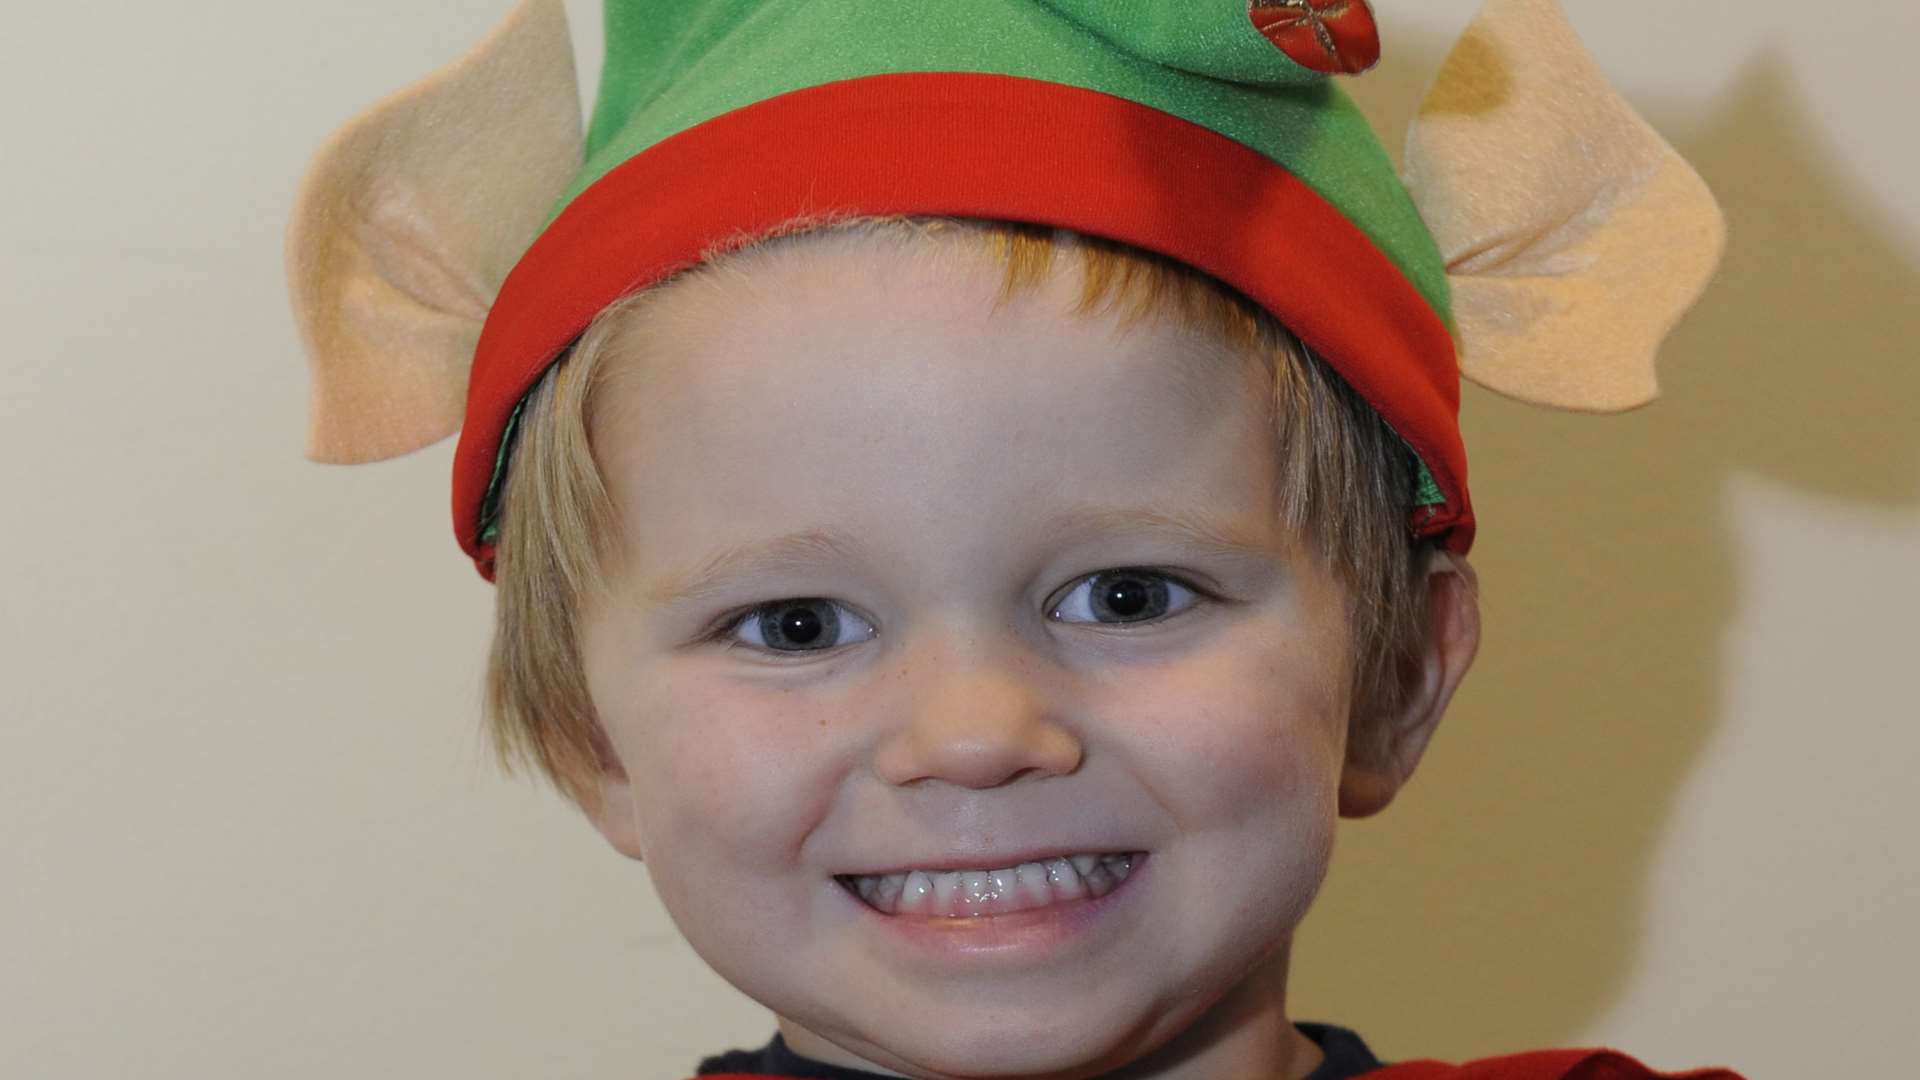 The Elf Service is on hand to help you spread some kindness around this part of Kent this Christmas